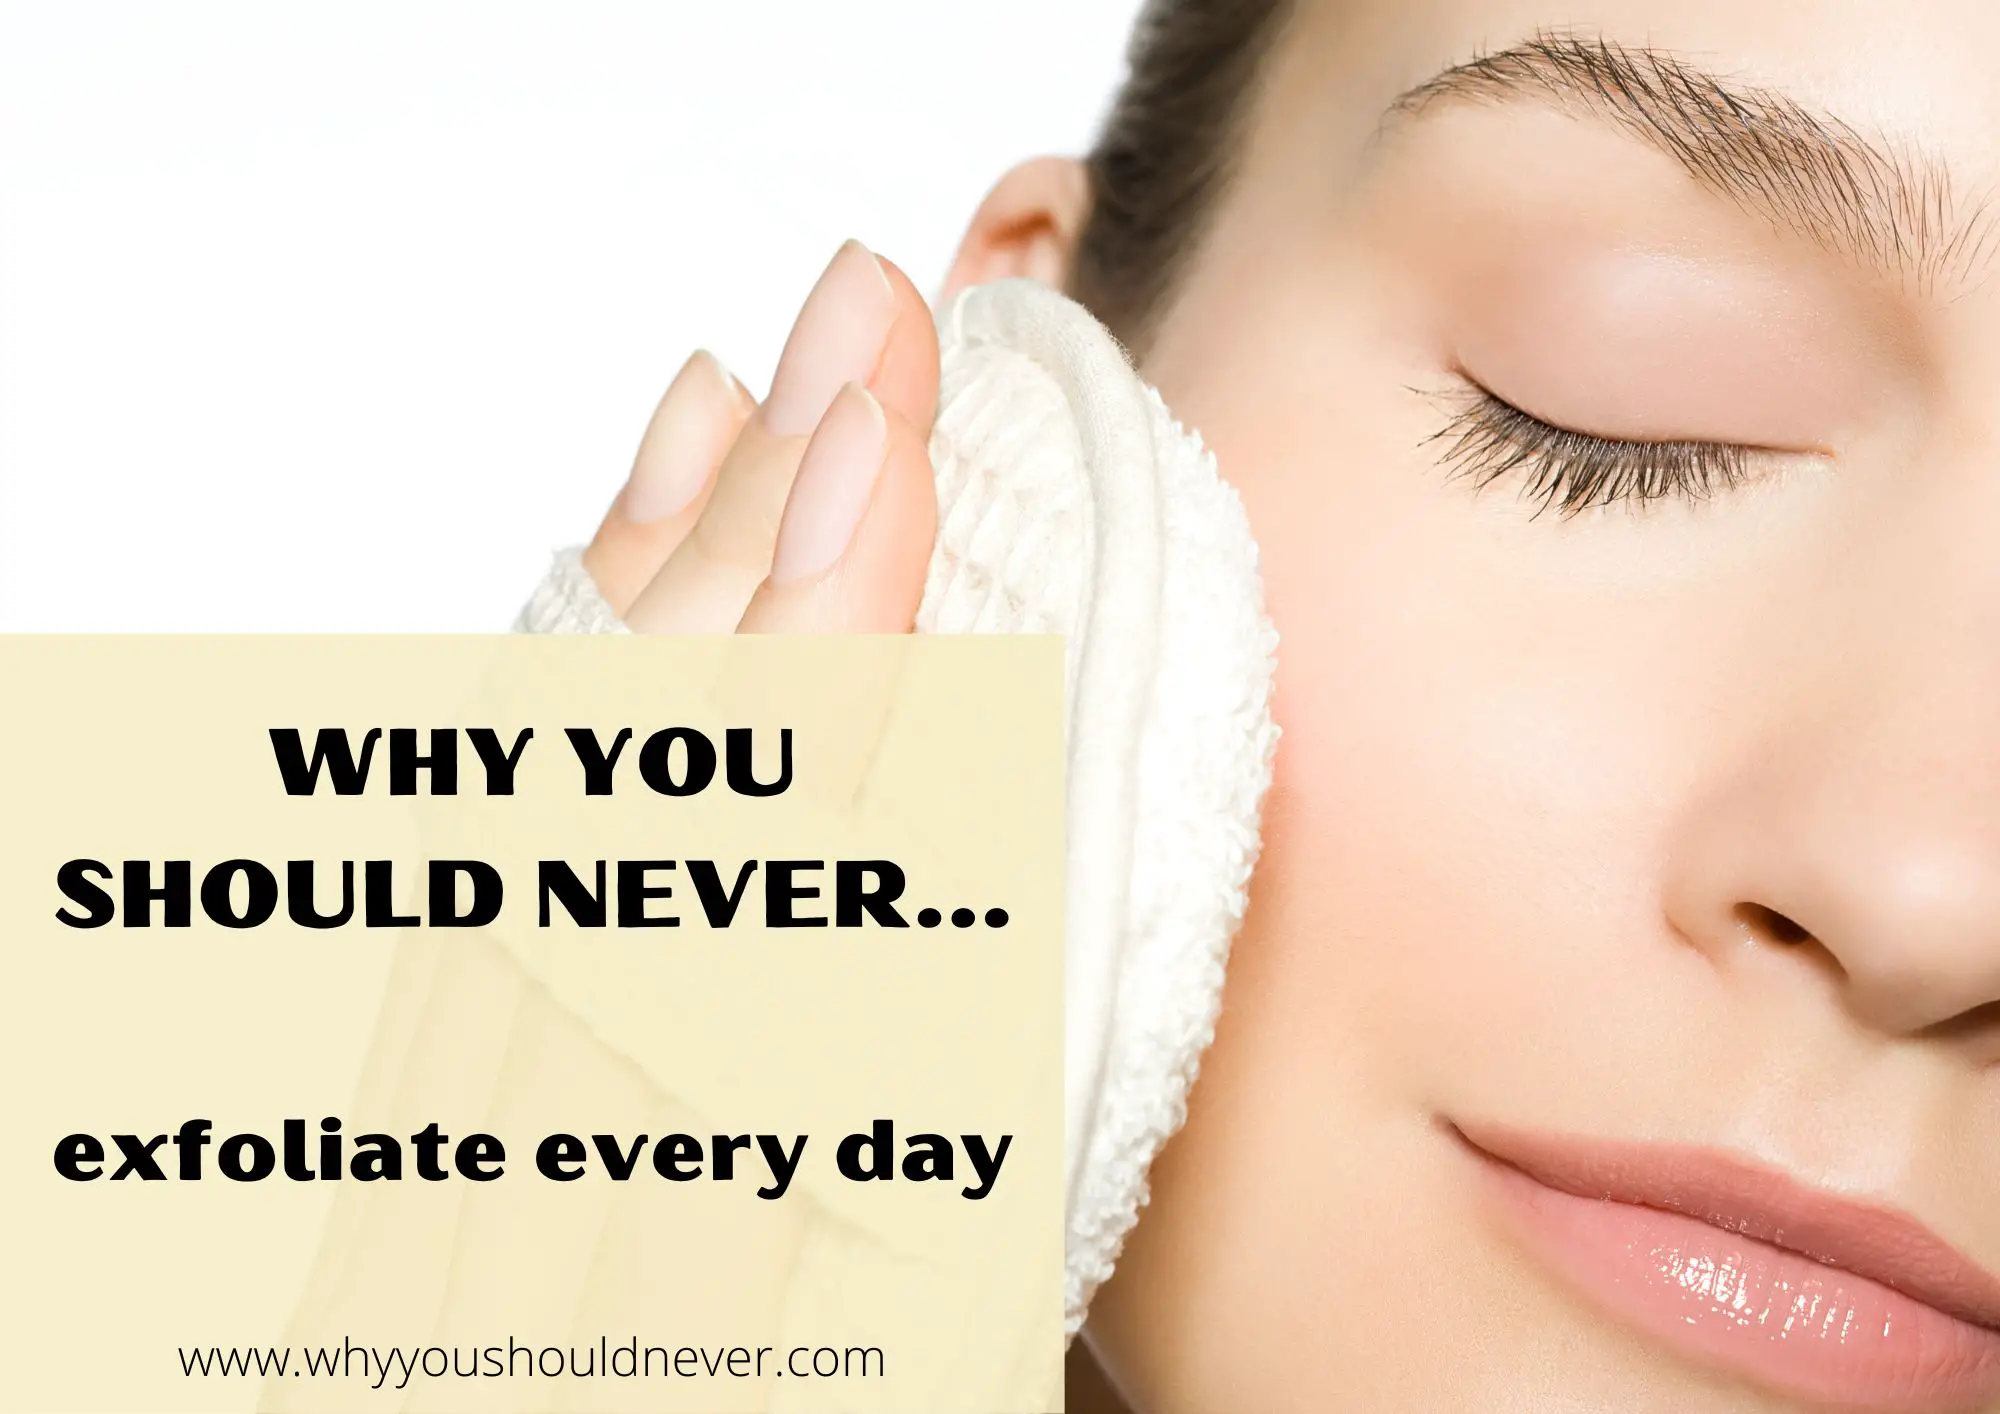 Why You Should Never Exfoliate Every Day